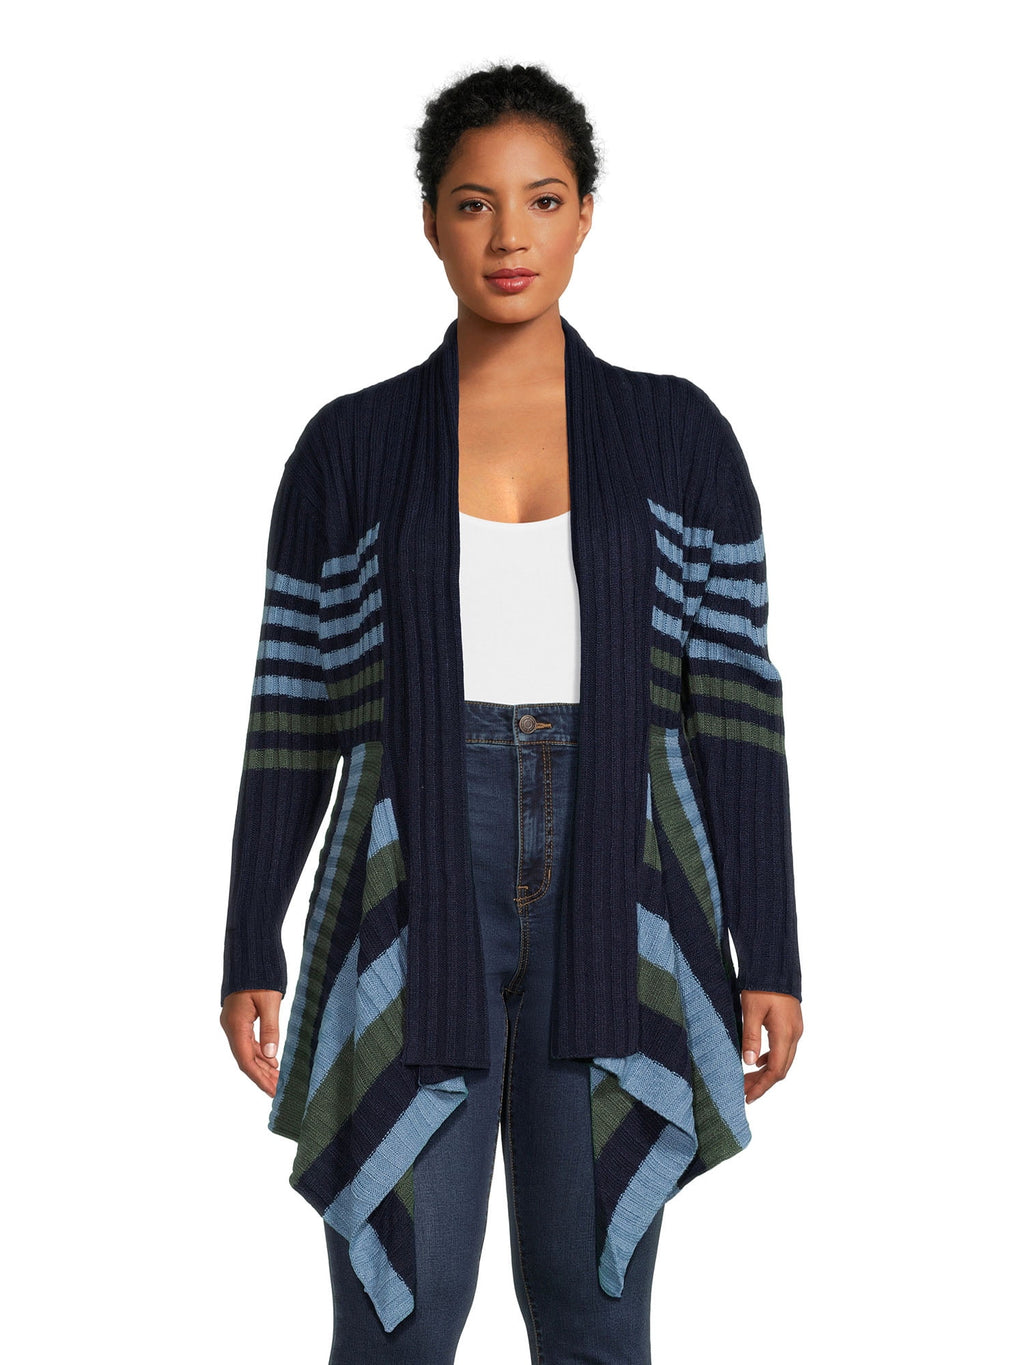 What's Next Women's and Women's Plus Size Ribbed Flyaway Cardigan - image 1 of 7